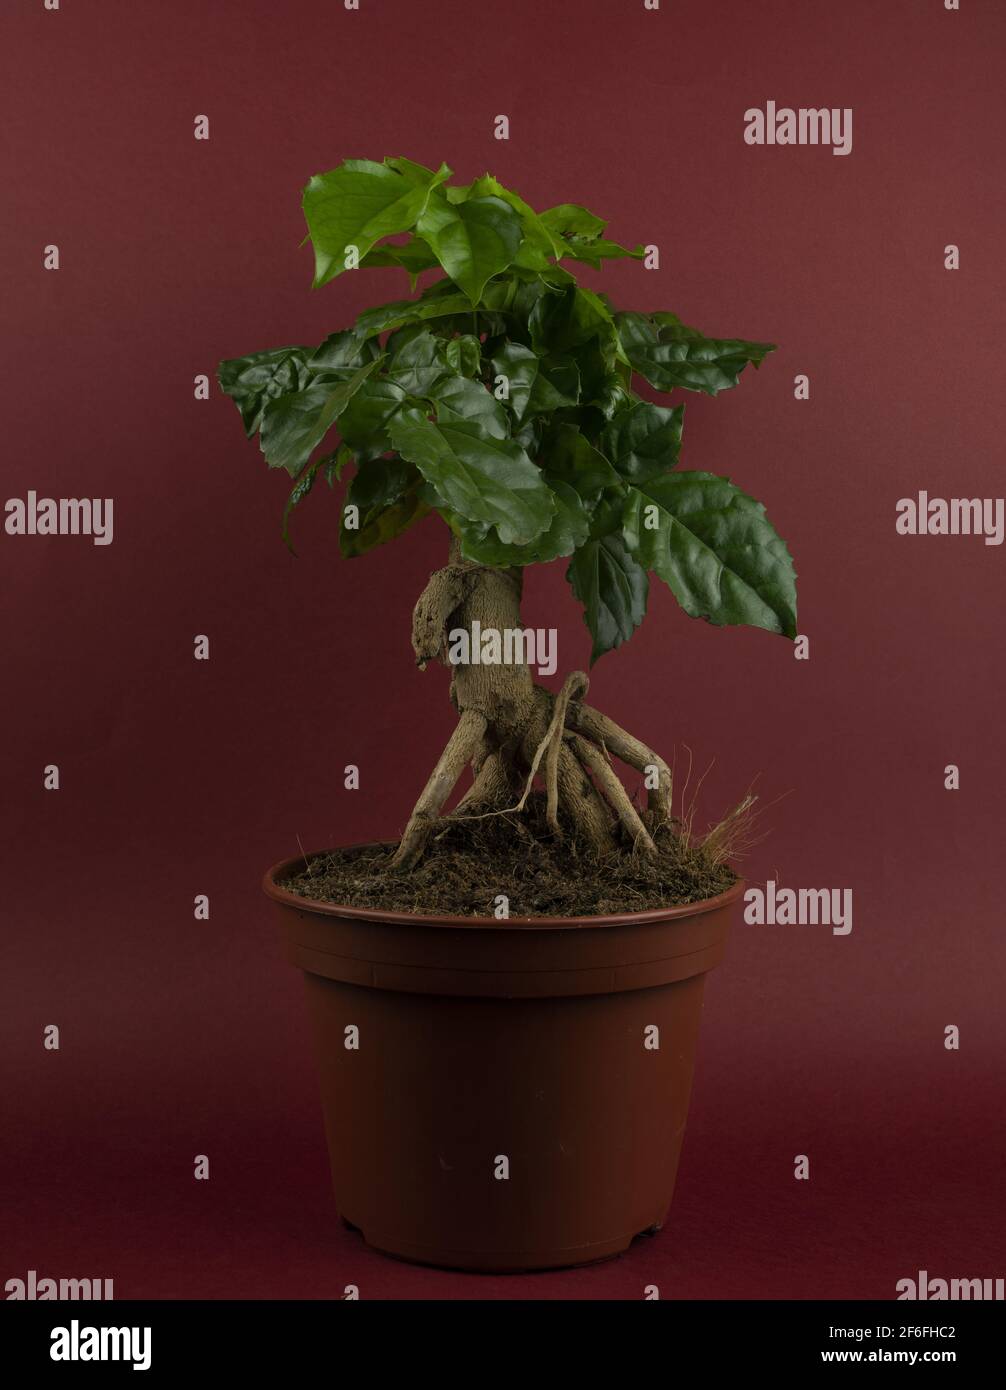 radermachera sinica in pot with red background Stock Photo